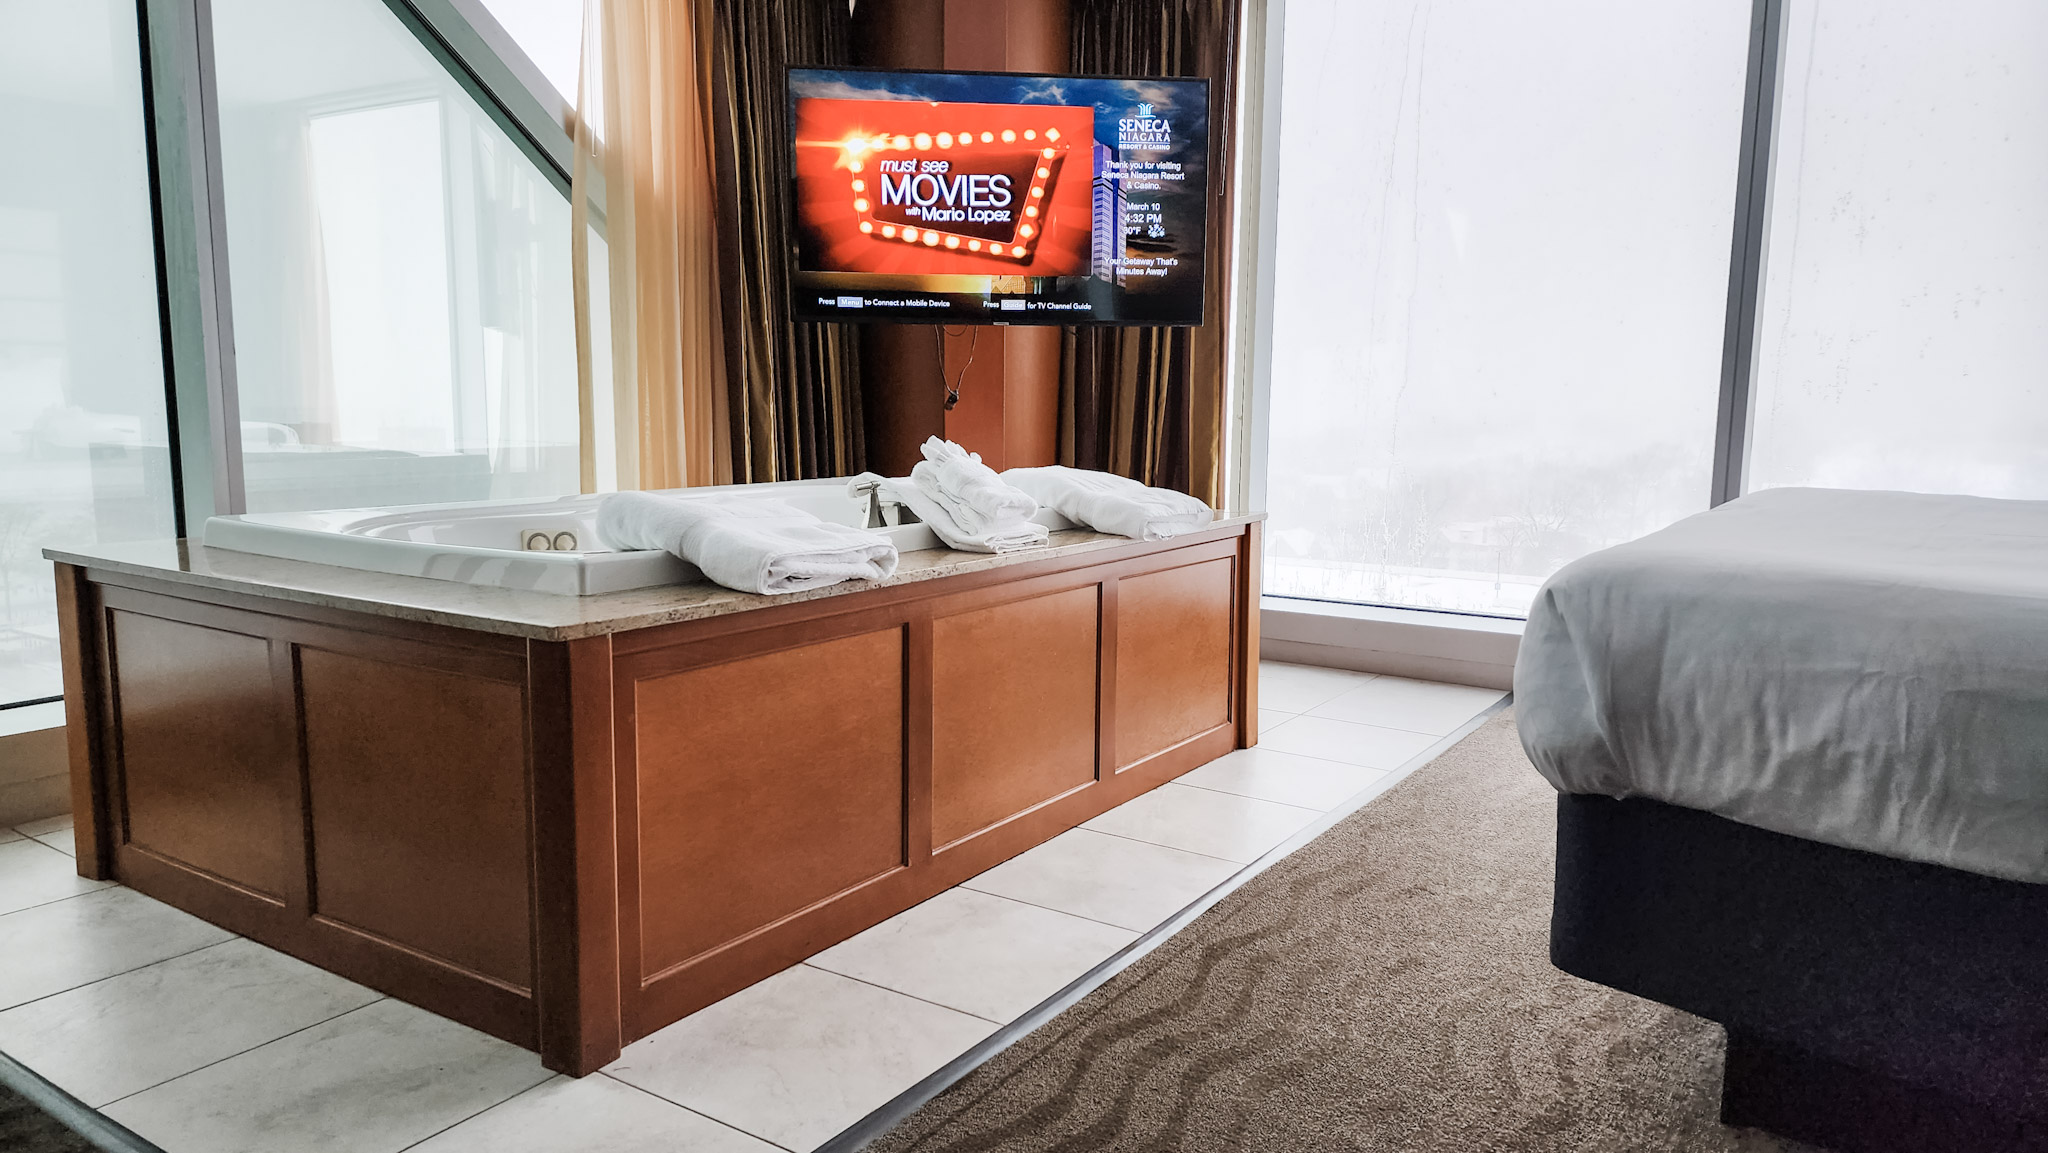 A close up of the jacuzzi and TV in a corner-suite at Niagara Seneca.